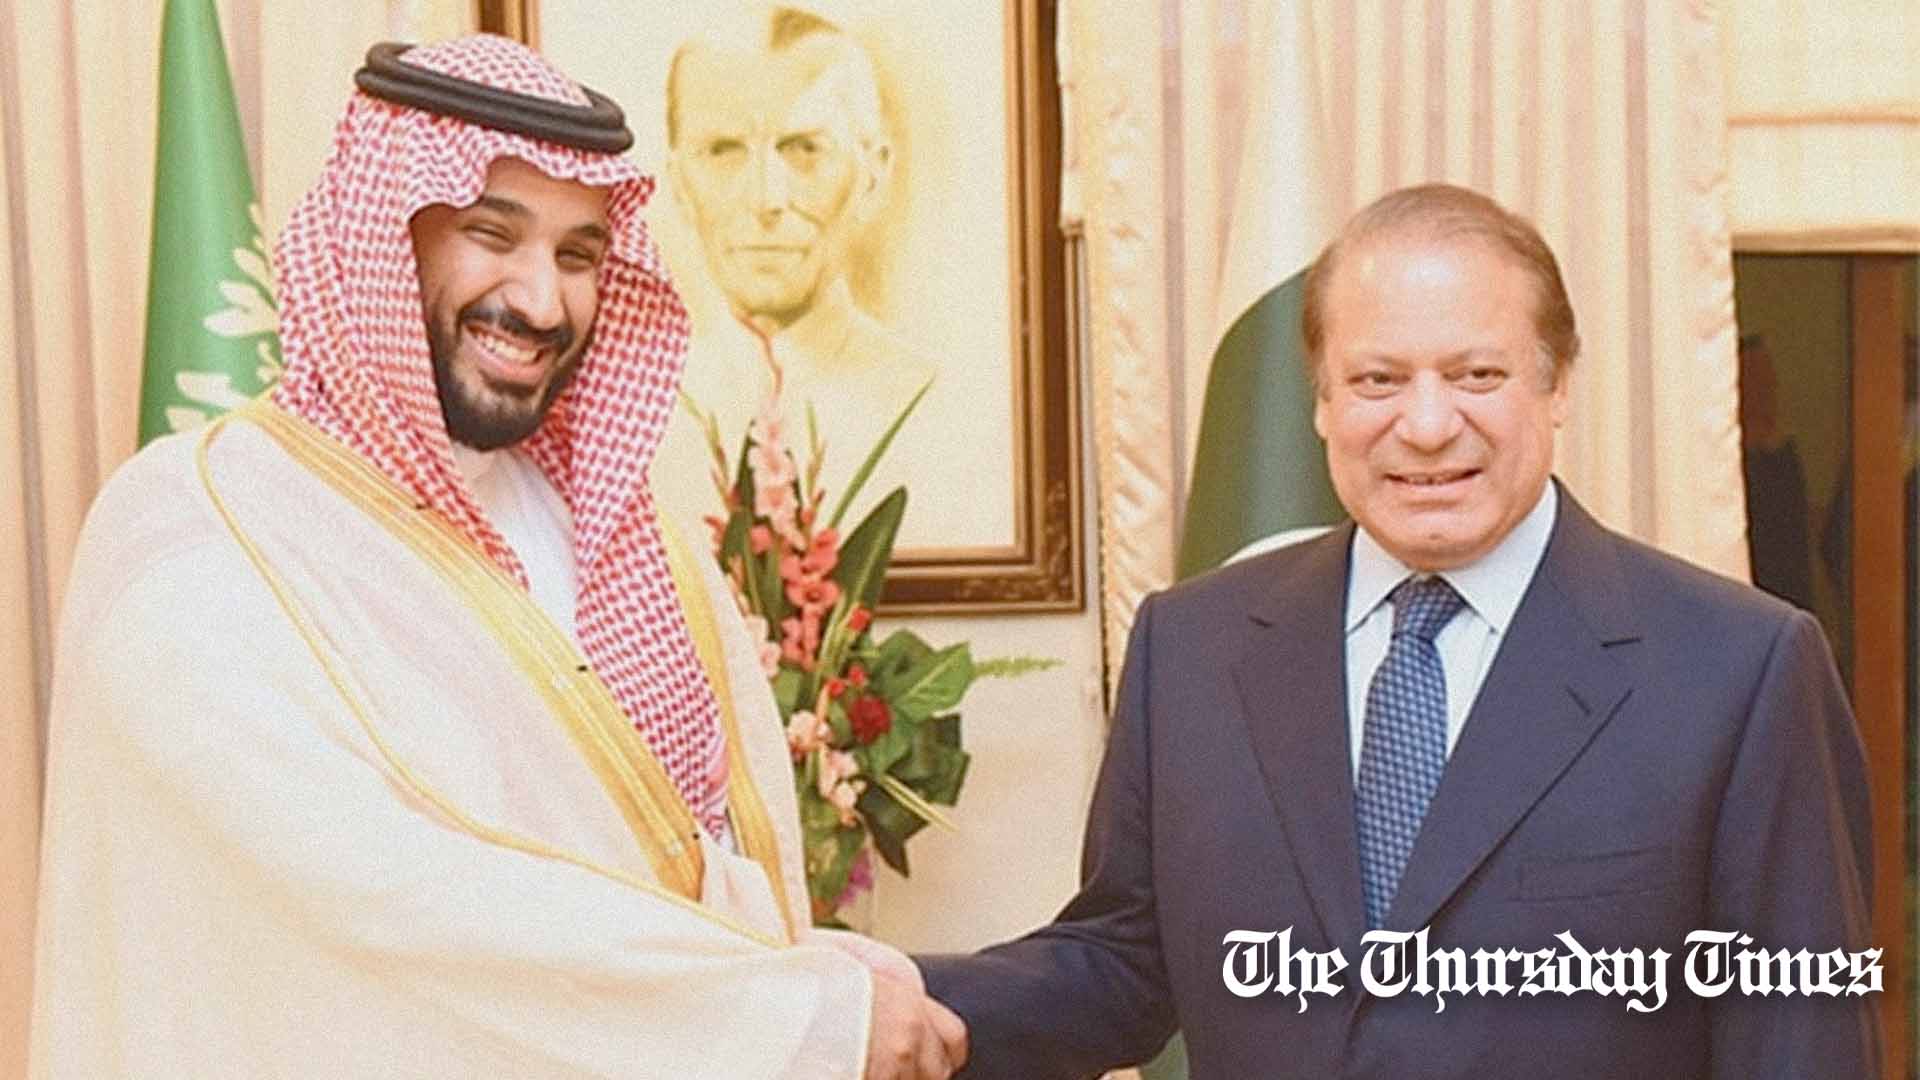 PML(N) chief Nawaz Sharif meets with Saudi Crown Prince Mohammad bin Salman in 2016. — FILE/THE THURSDAY TIMES